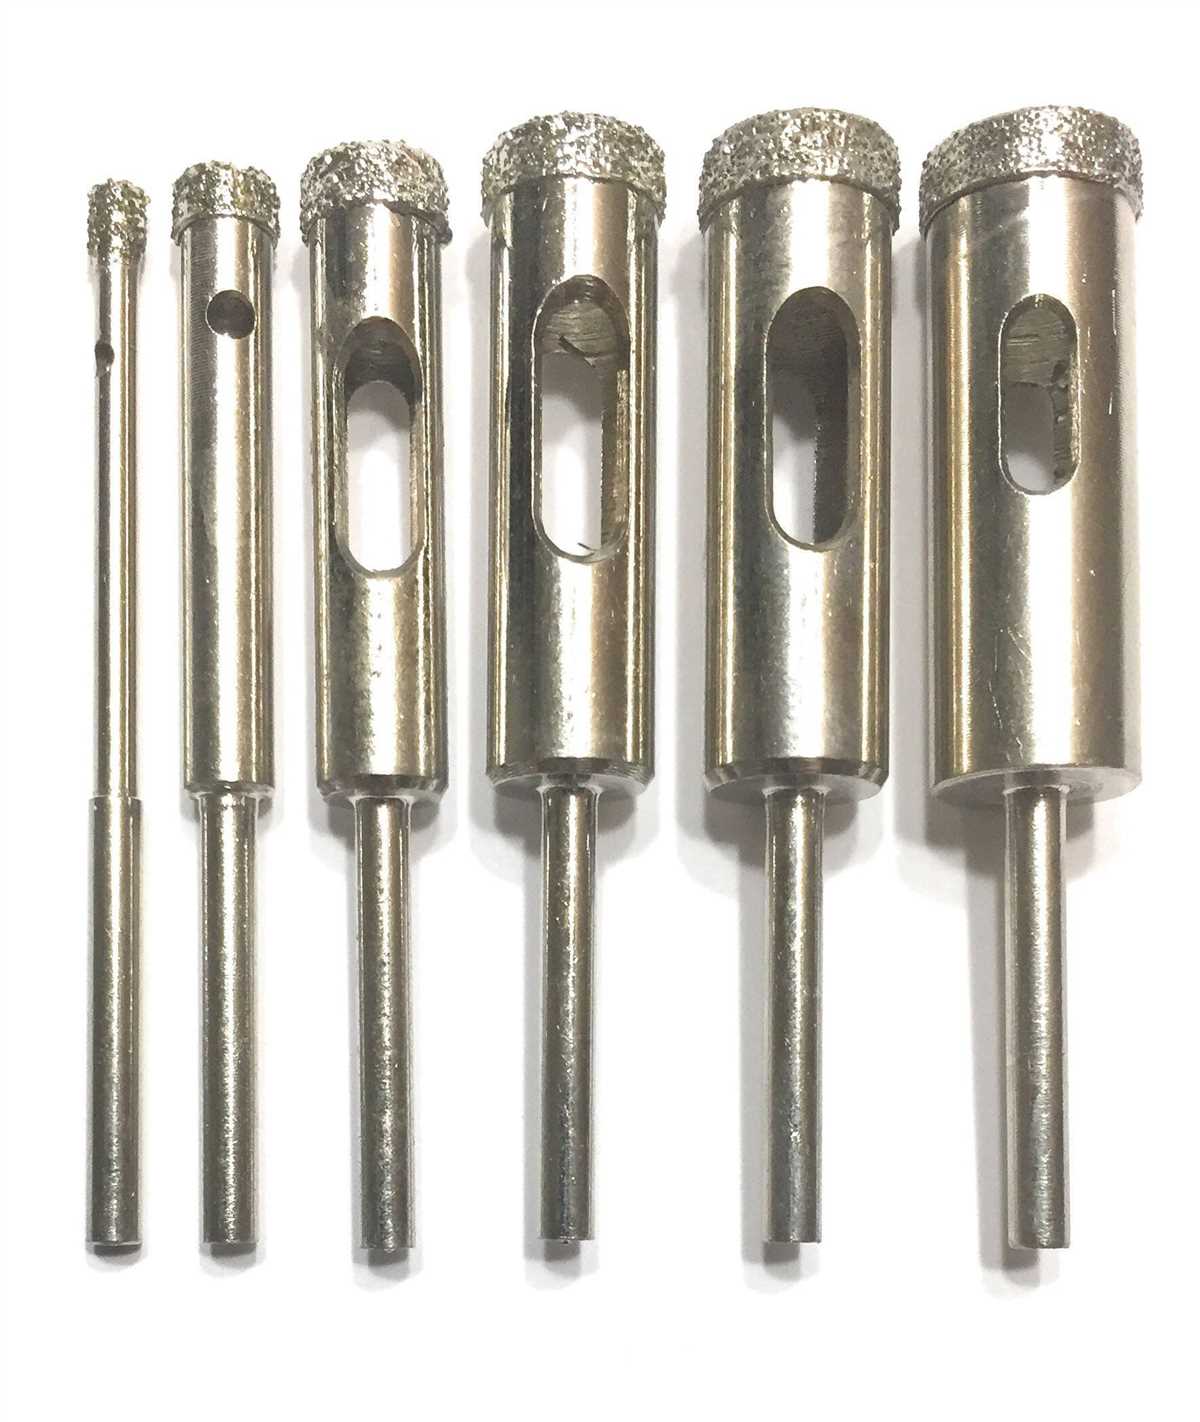 How to care for diamond drill bits